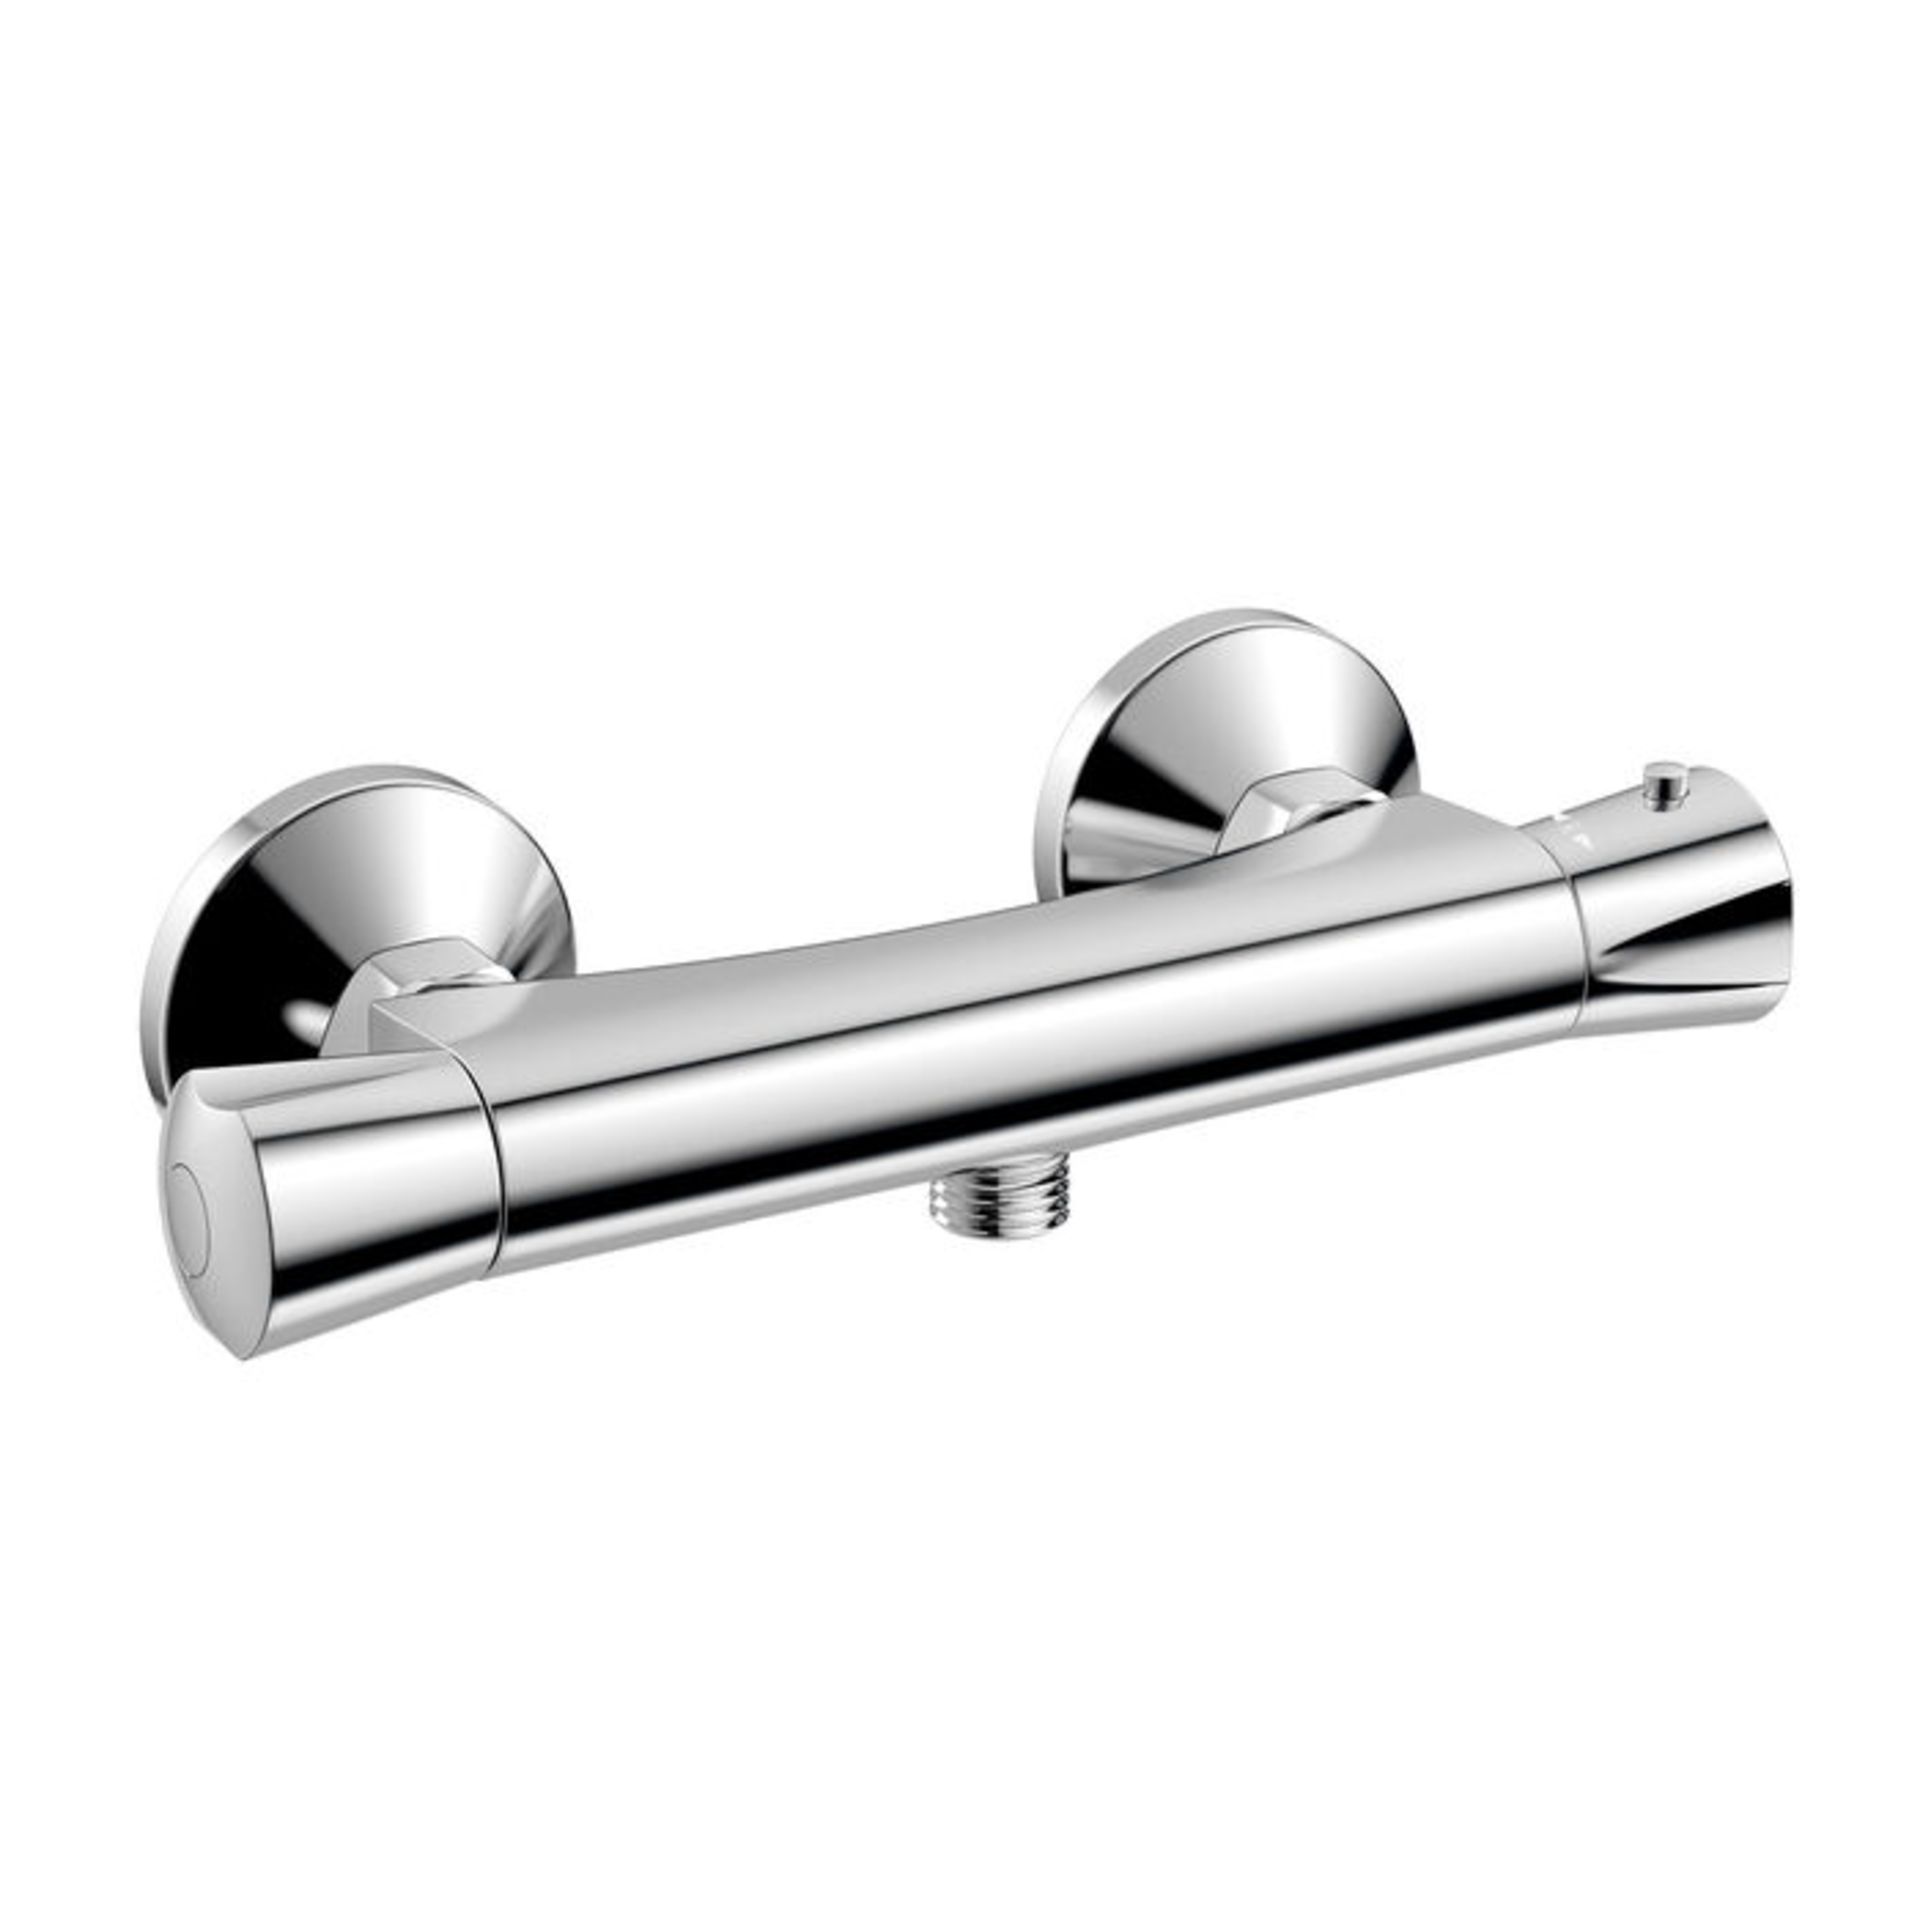 (NV82) Thermostatic Shower Valve - Round Bar Mixer Chrome plated solid brass mixer Cool to To... - Image 2 of 2